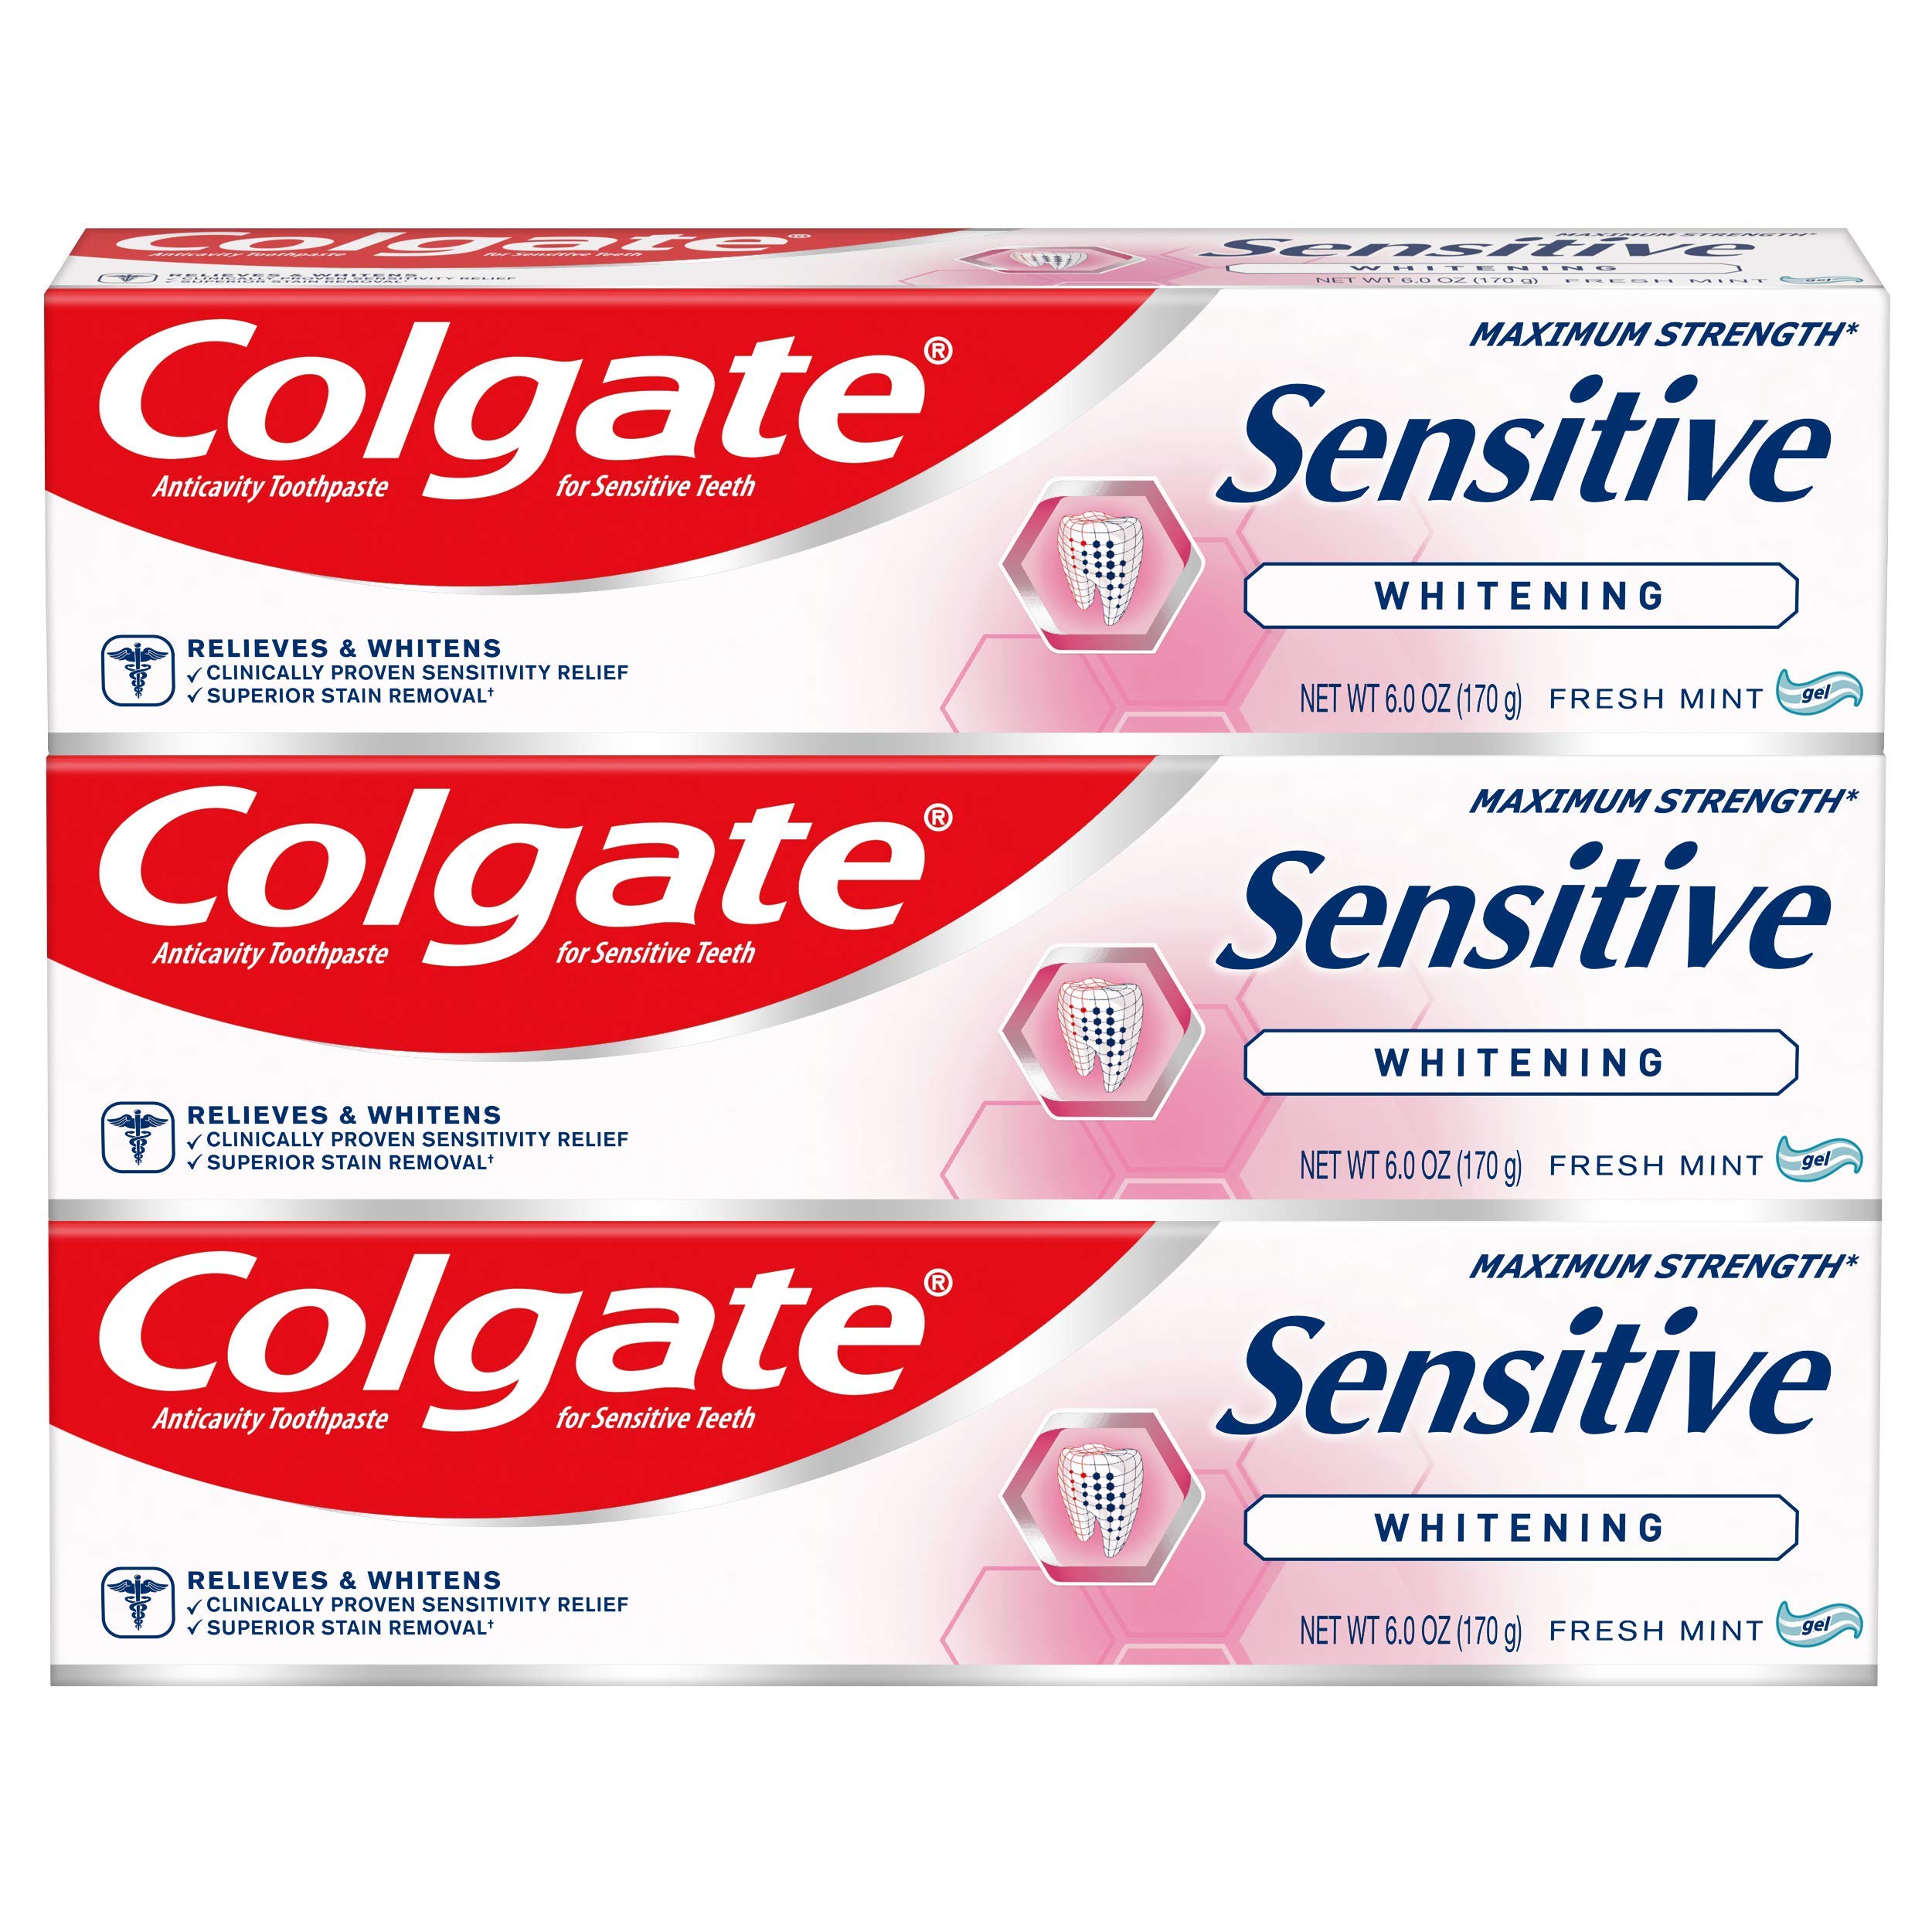 Colgate Sensitive 3 pack $9.11 Amazon or lower with S&S